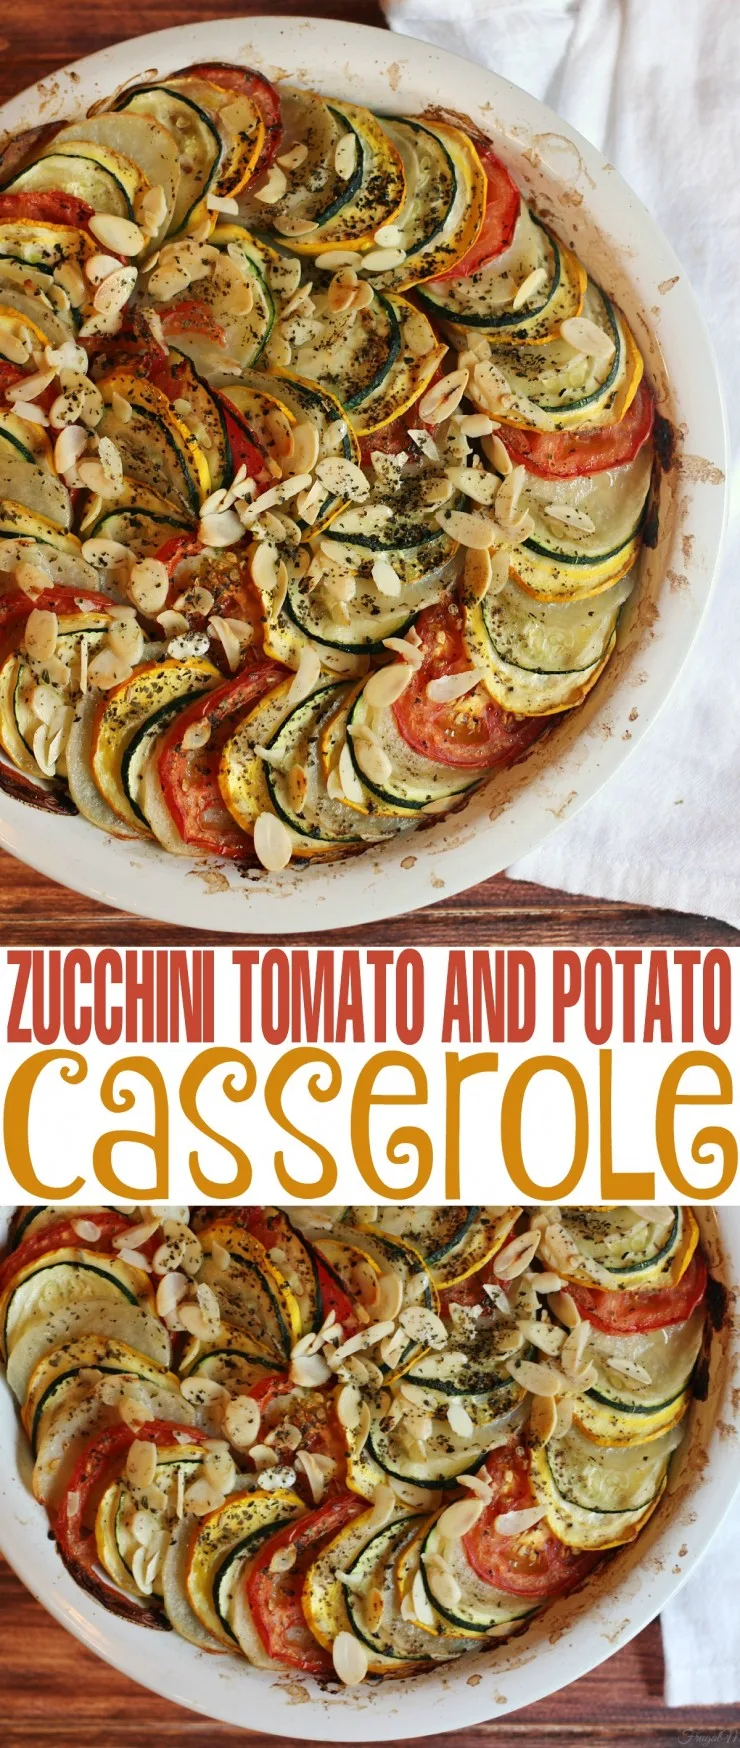 Harvest from your summer garden and make this delicious Zucchini, Tomato and Potato Casserole recipe! It's a perfect summer side dish for veggie lovers!